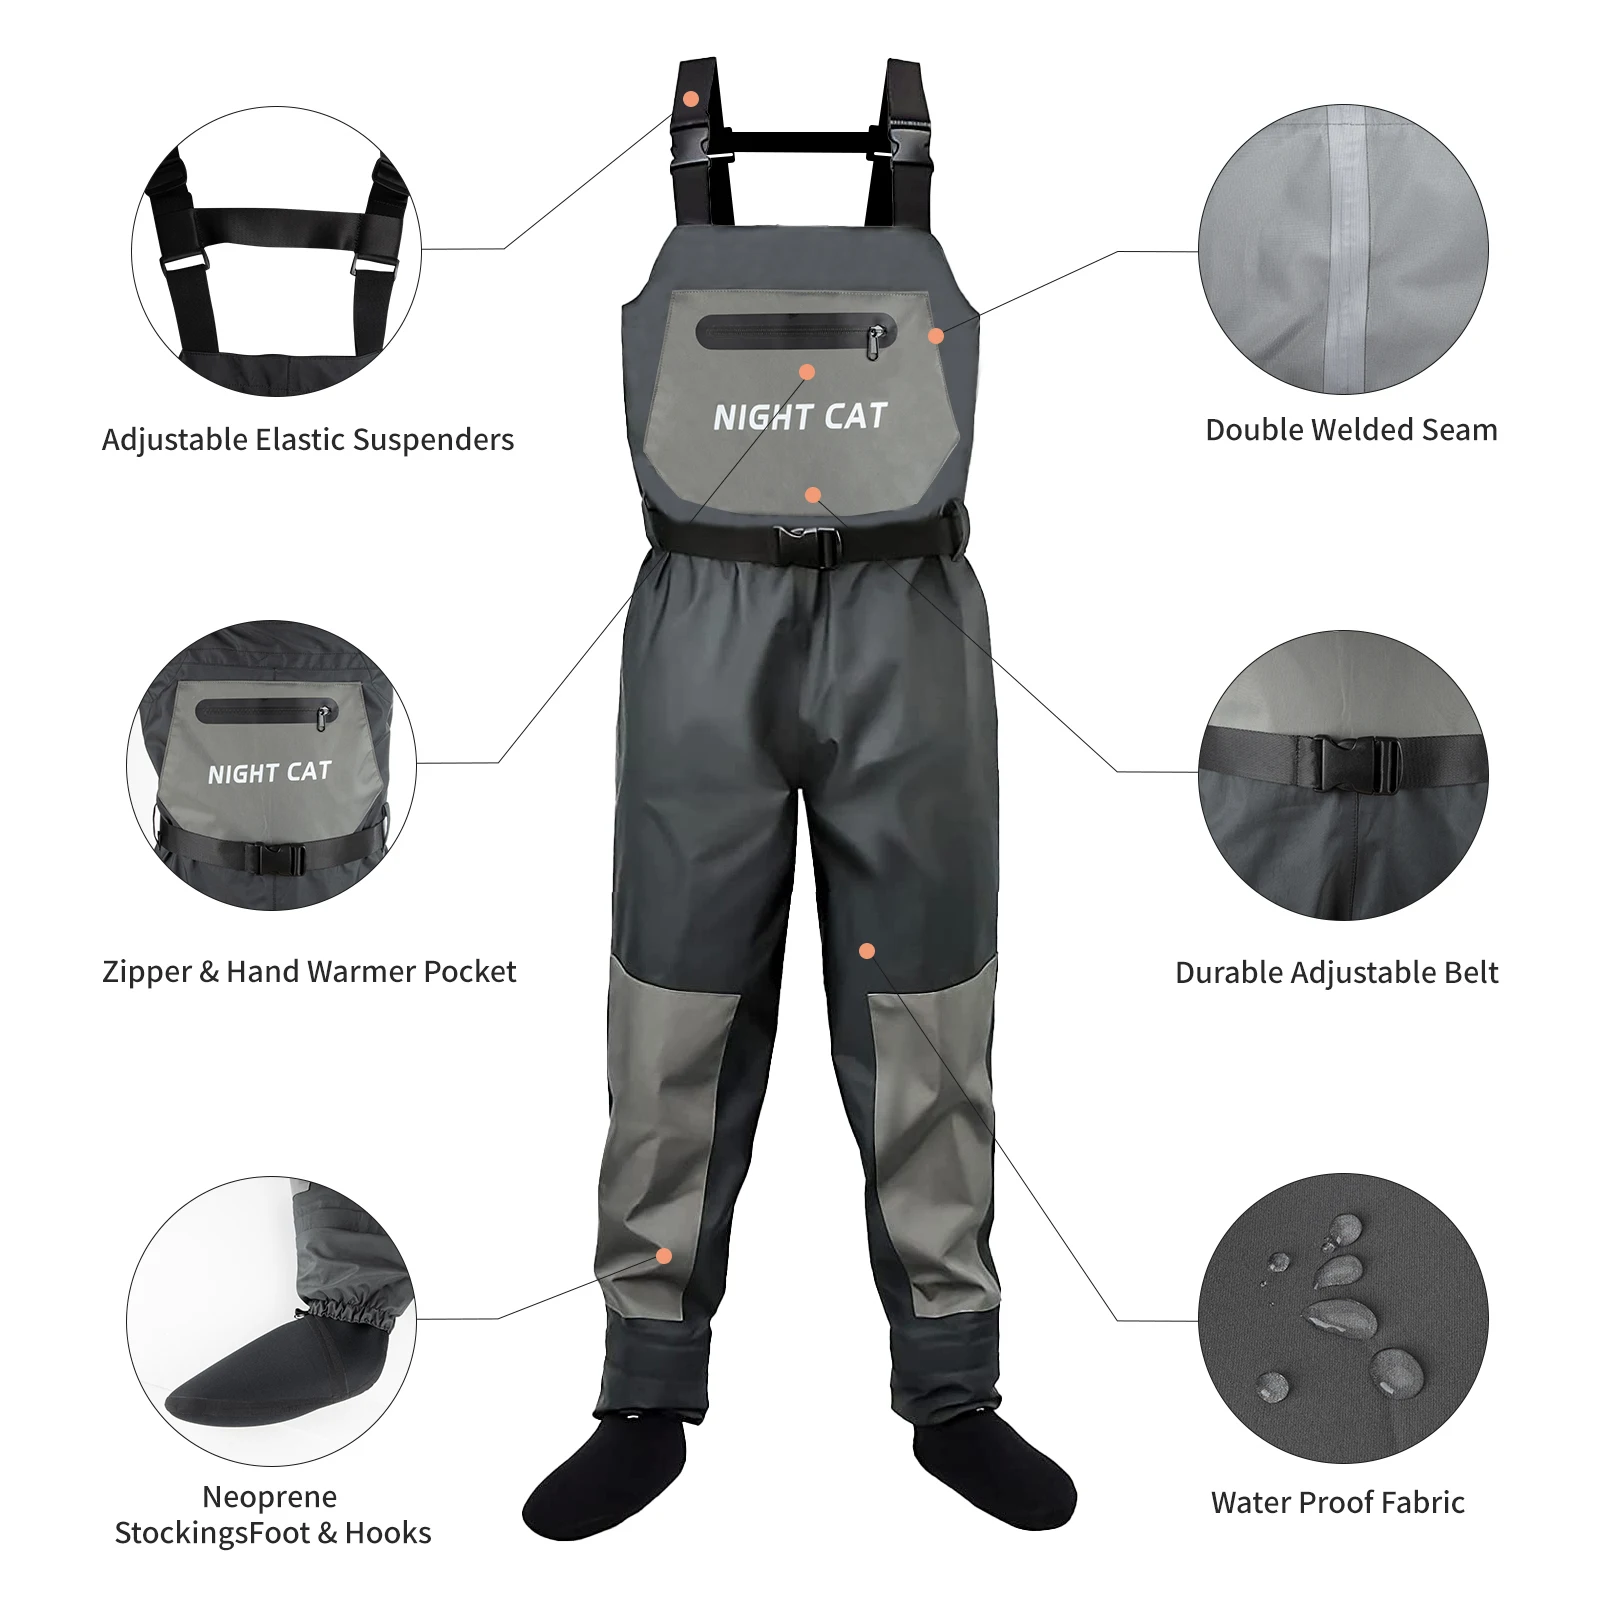 Night Cat Fly Fishing Chest Waders Breathable Waterproof Wader